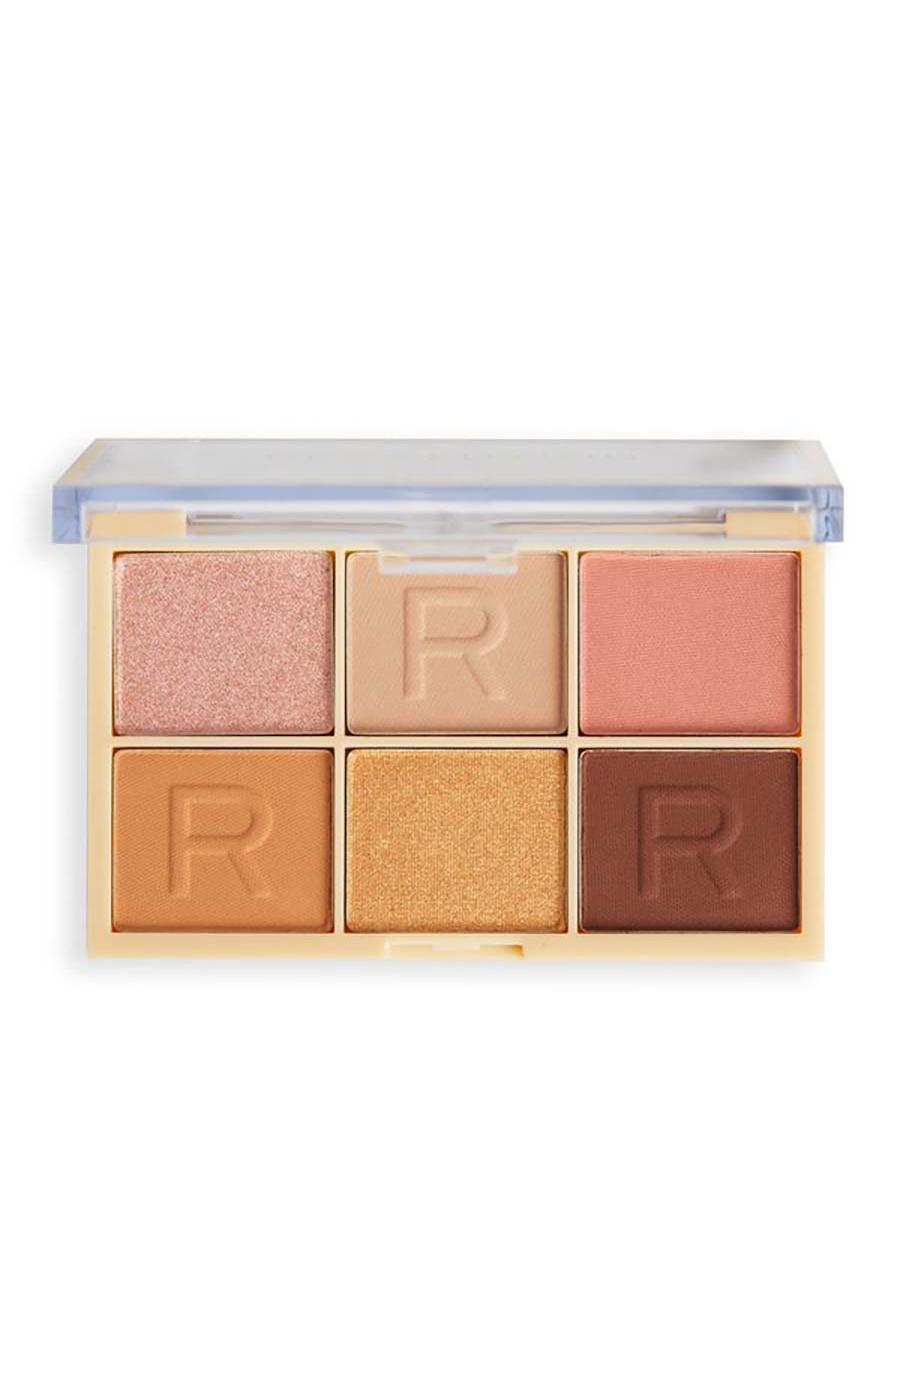 Makeup Revolution Reloaded Palette - Nude About You; image 2 of 3